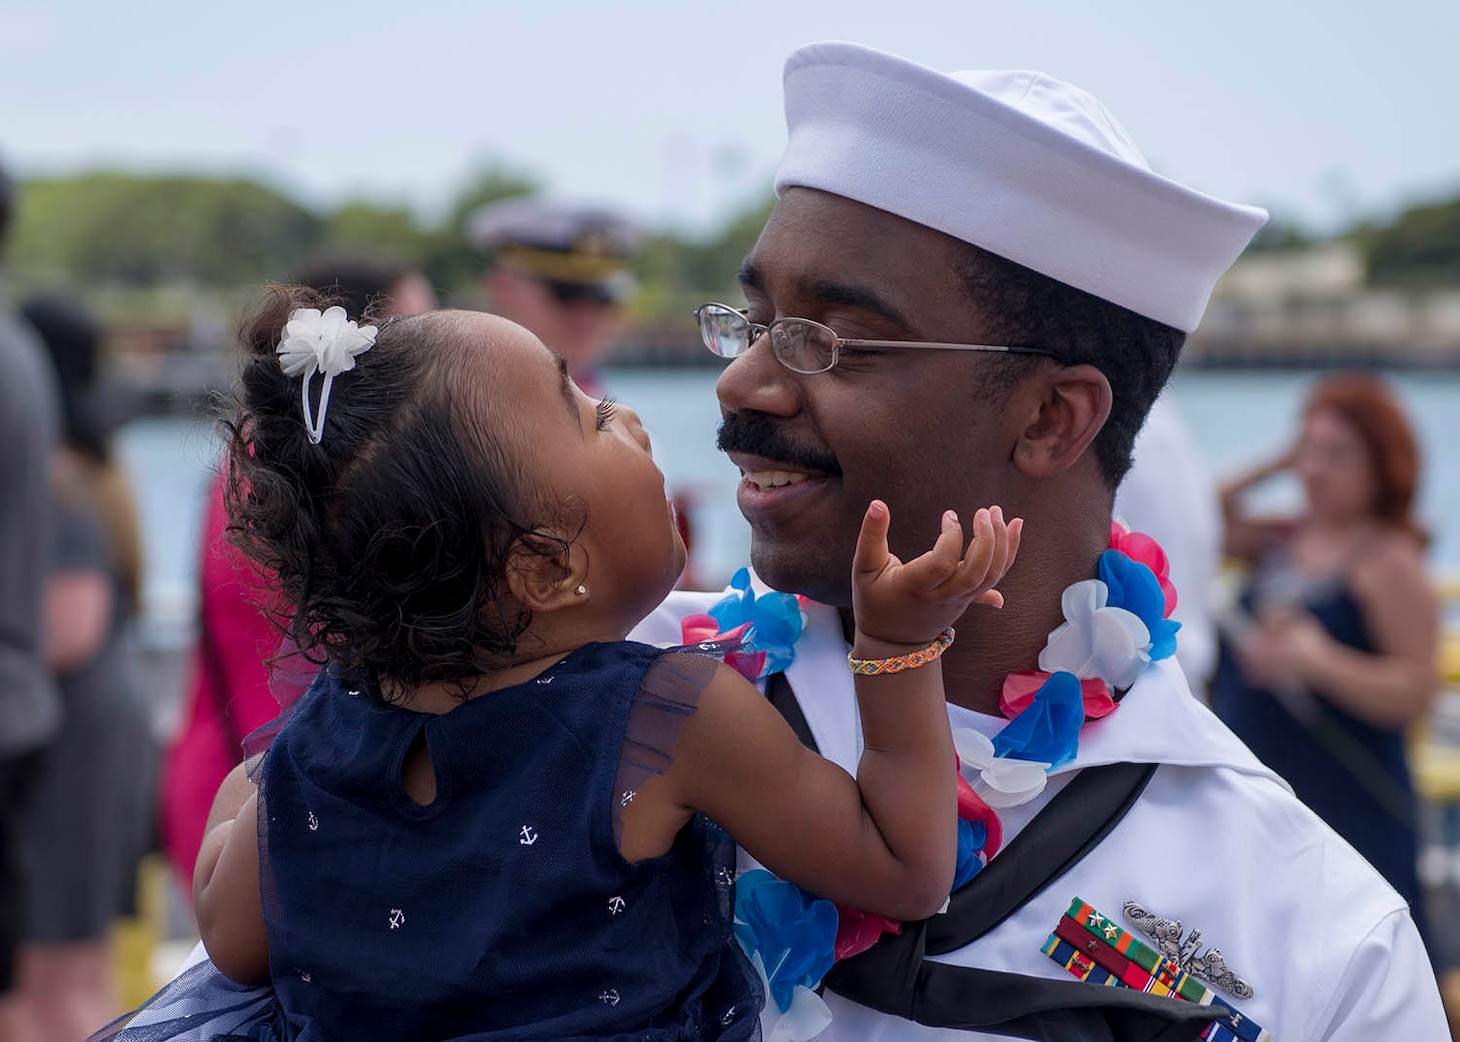 170323-N-LY160-0416 PEARL HARBOR, Hawaii (March 23, 2017) Yeoman 2nd Class Bryce Mack, a native of Dallas, Texas, reunites with his daughter on the submarine piers in Joint Base Pearl Harbor-Hickam. The Los Angeles-class fast-attack submarine USS Louisville (SSN 724) successfully completed a six-month deployment to the Western Pacific Ocean. (U.S. Navy photo by Mass Communication Specialist 2nd Class Michael H. Lee/Released)